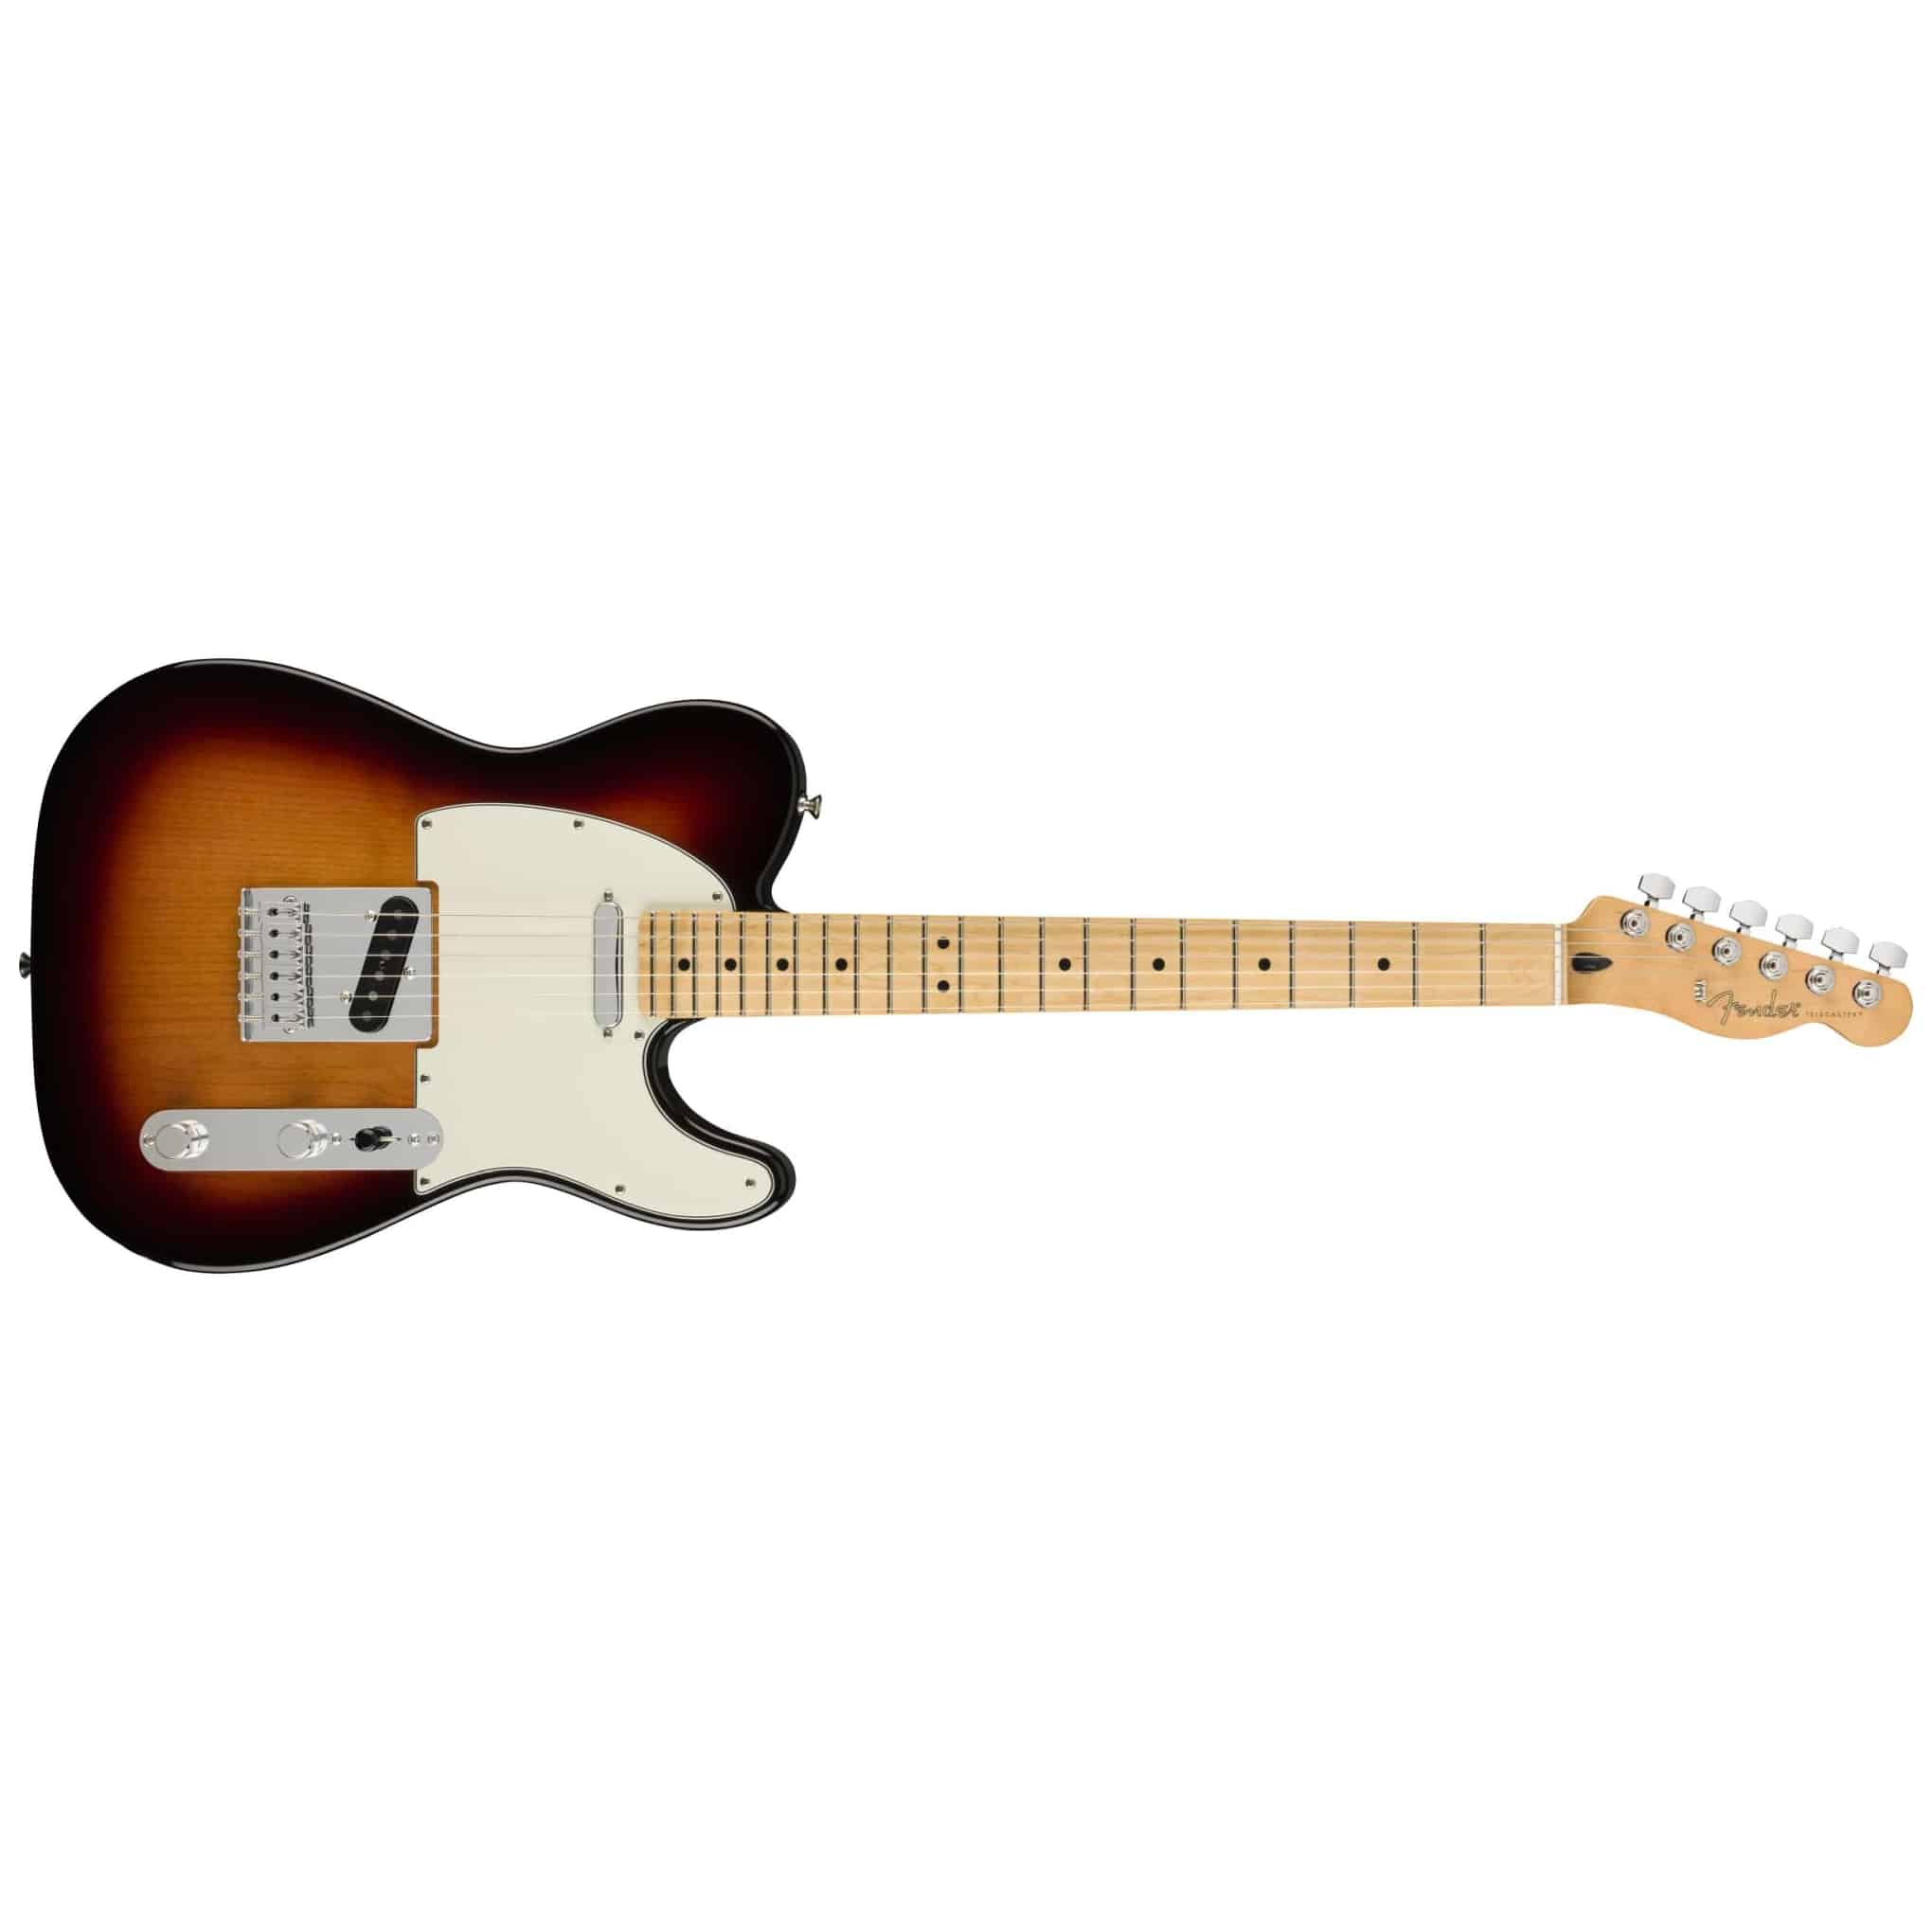 Player Telecaster MN 3TS